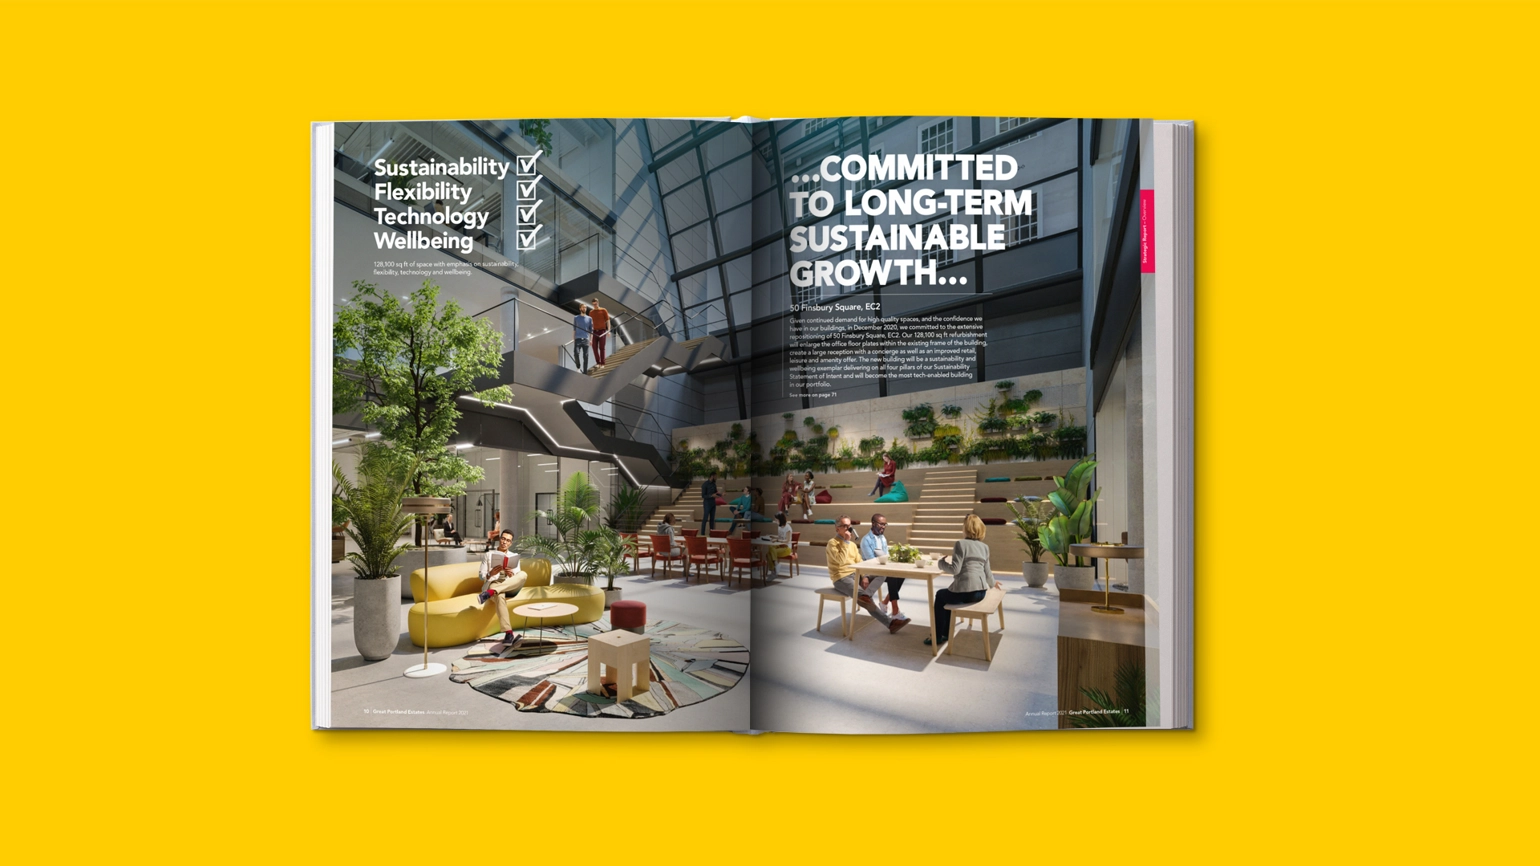 A page in the report about commitment to sustainable growth 